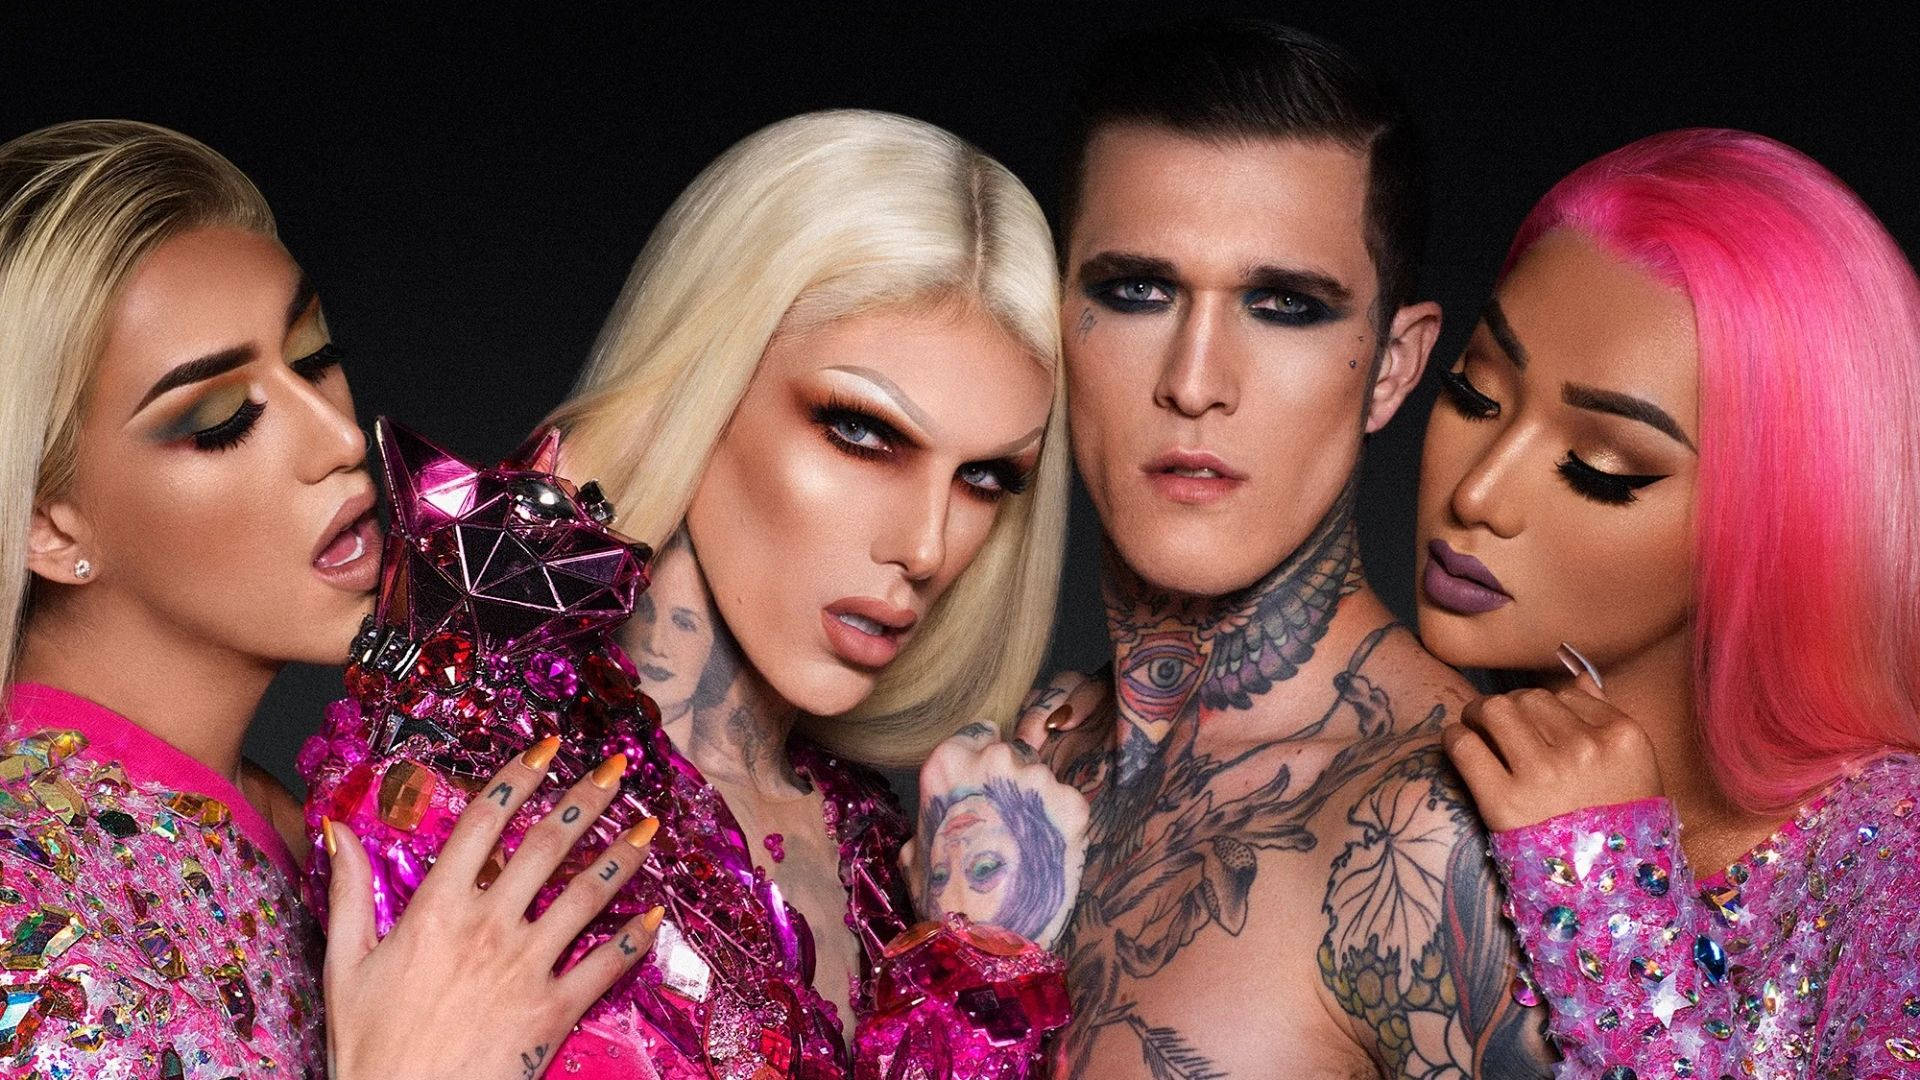 Jeffree Star With Models Wallpaper